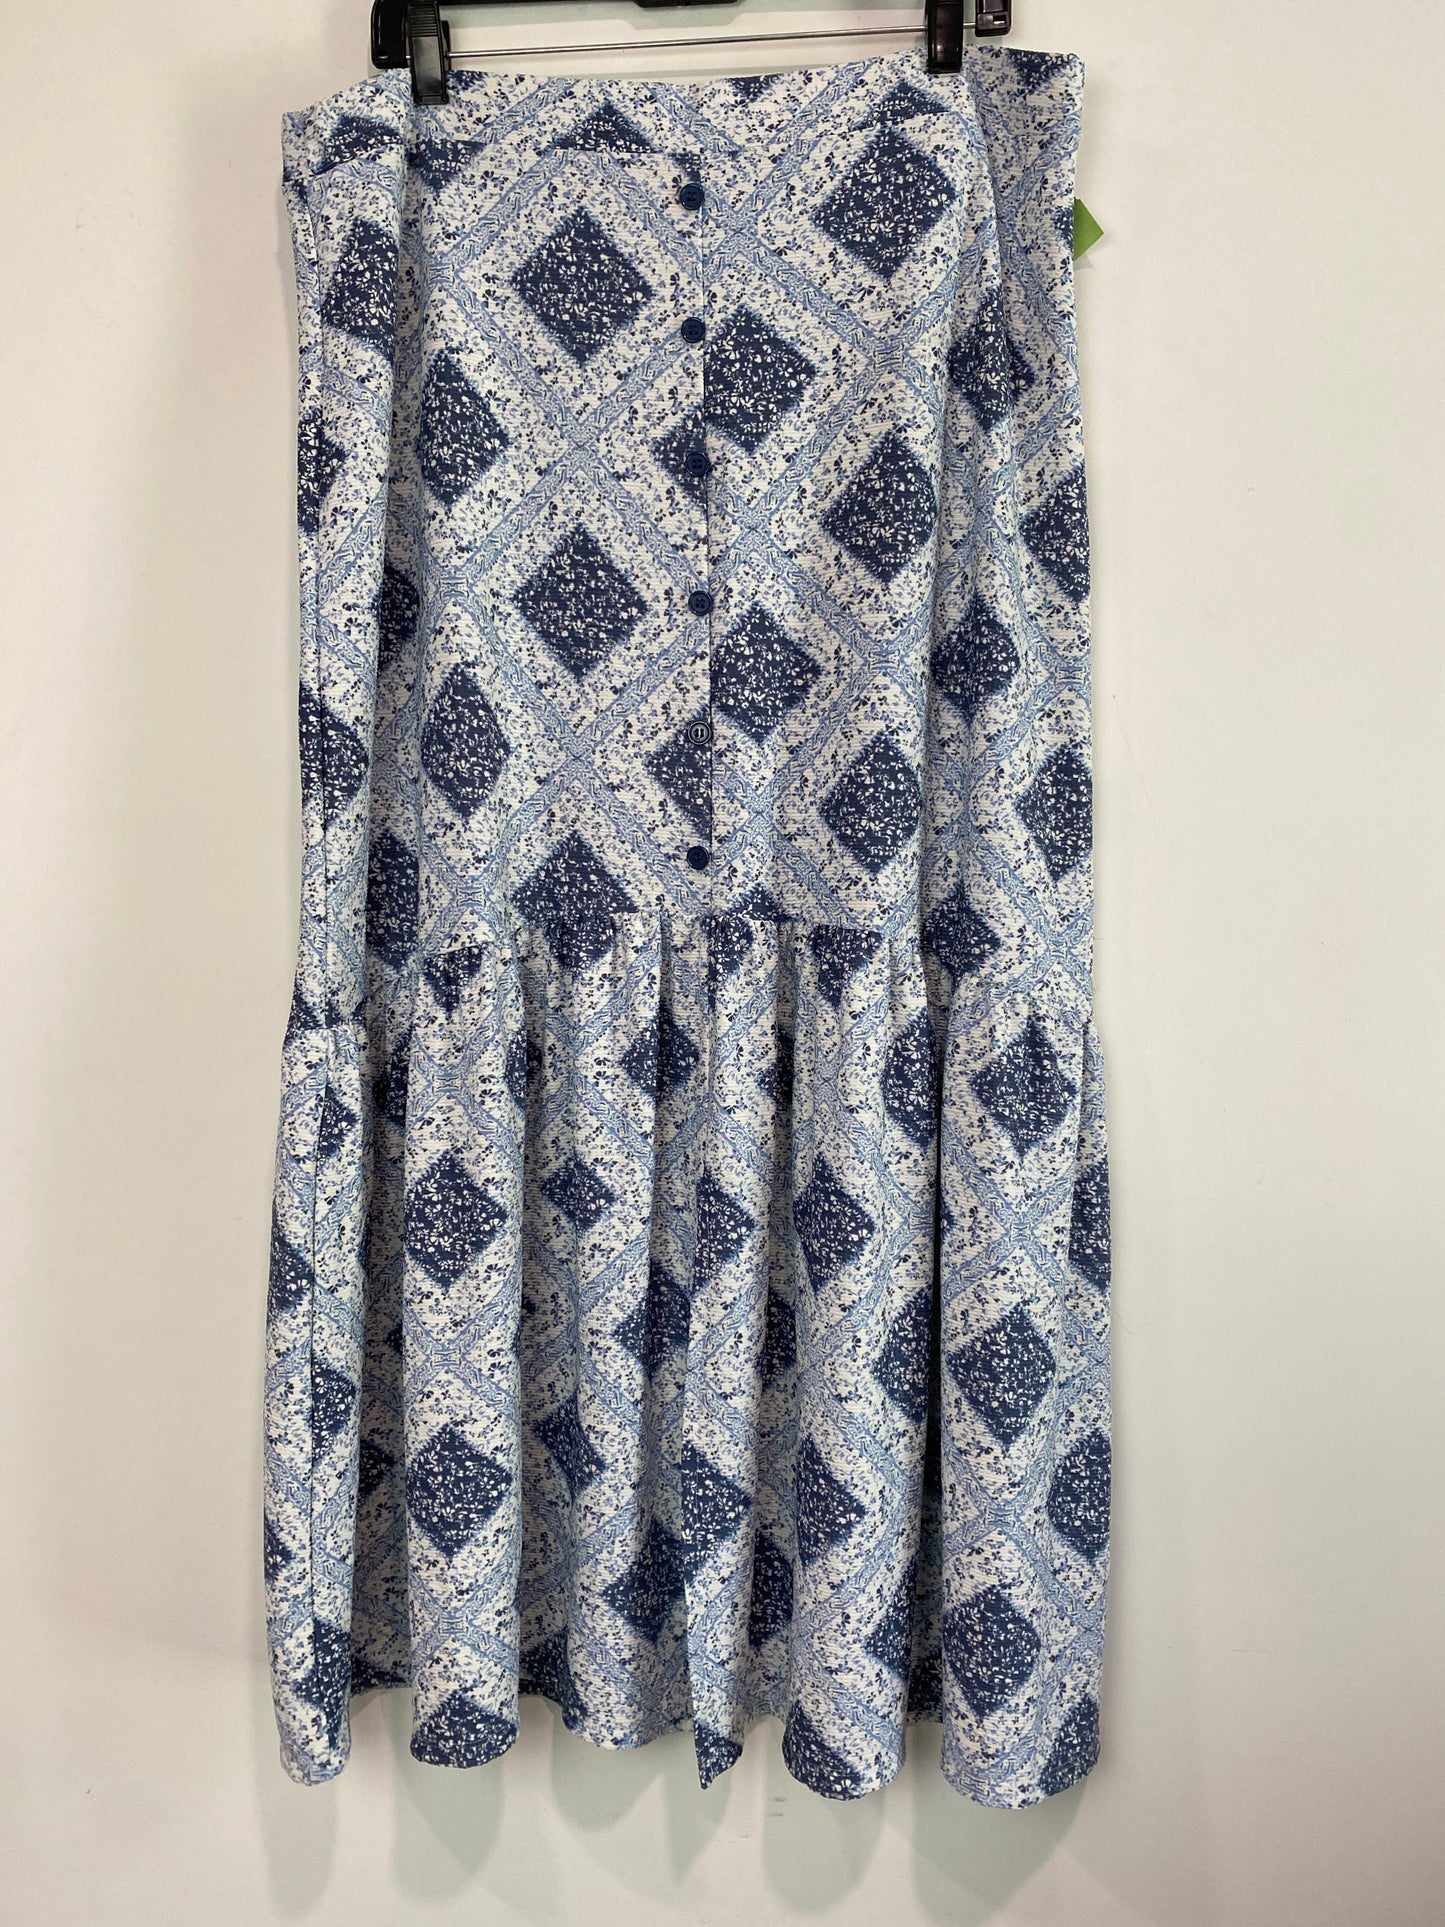 Skirt Maxi By Cato  Size: 18